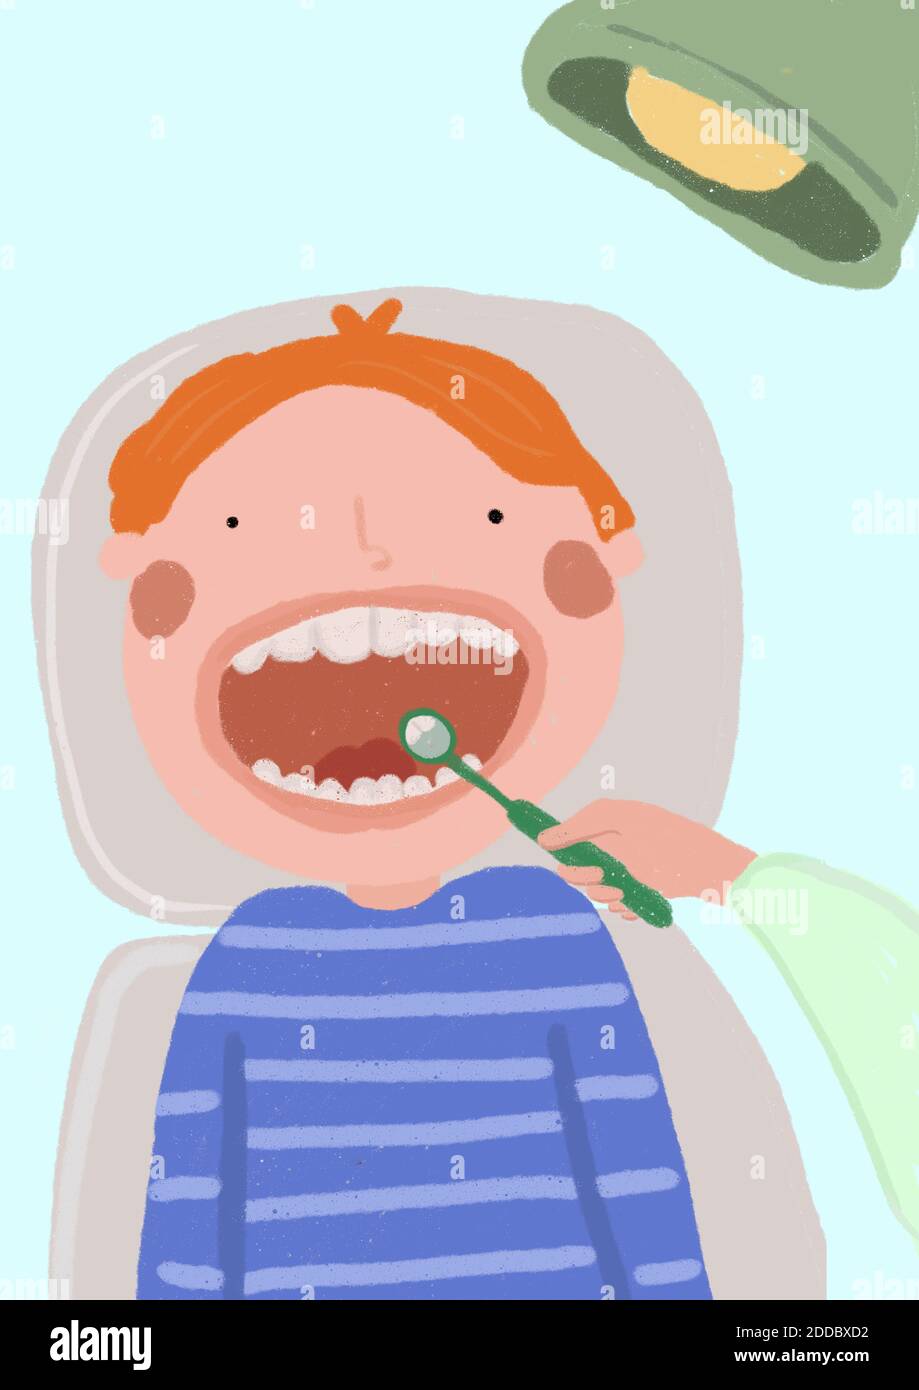 Clip art of boy during exam at dentists office Stock Photo